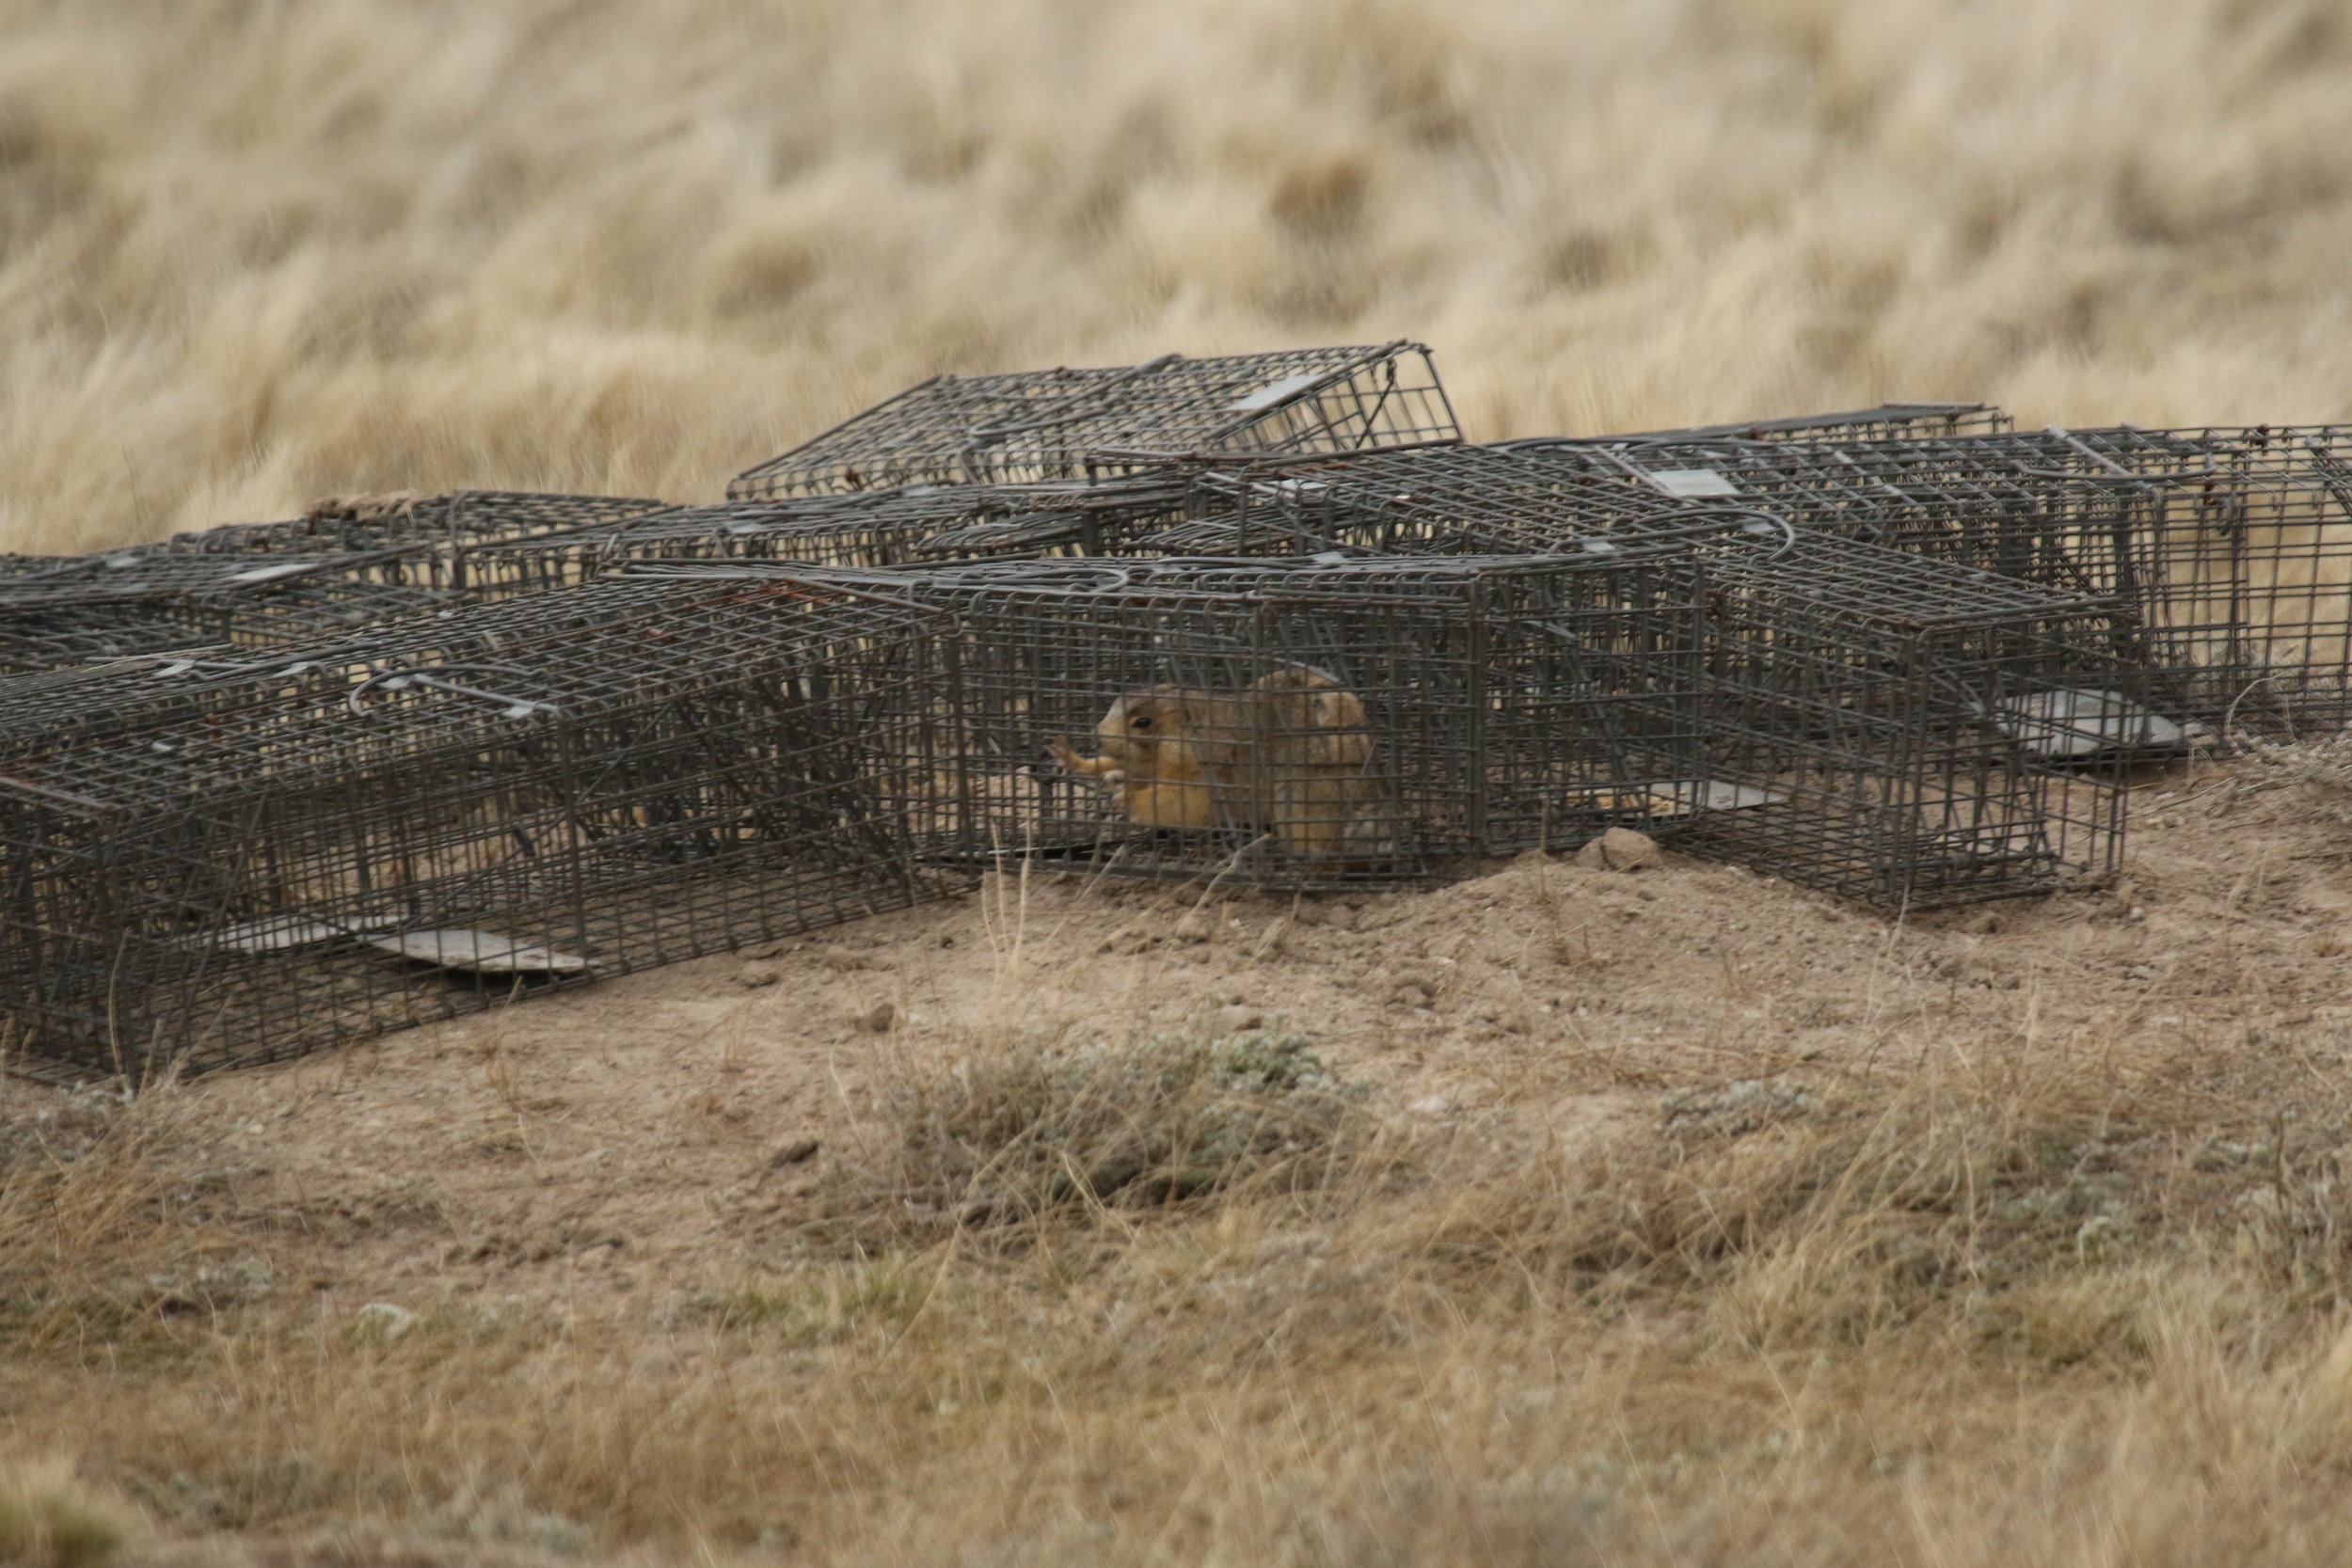  An unmarked prairie dog caught in a surrounding.  ©MRR 2017  